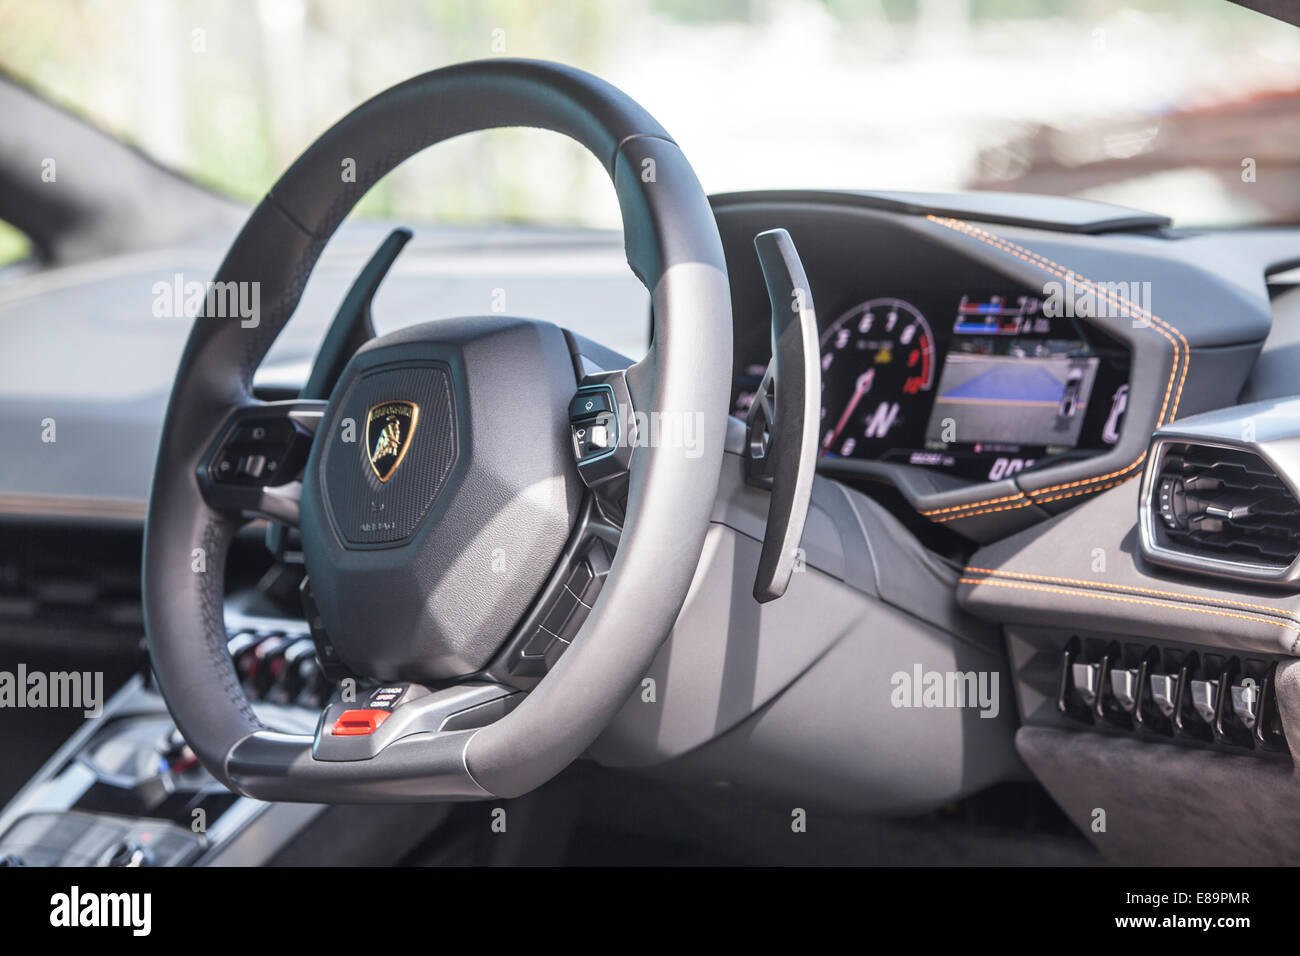 Aberdeen, Hong Kong, 18th Sep, 2014. View of the interior of the new Lamborghini Huracan sports car, parked near a shipyard. Photoshoot for Asia Pacific Boating Magazine. Stock Photo